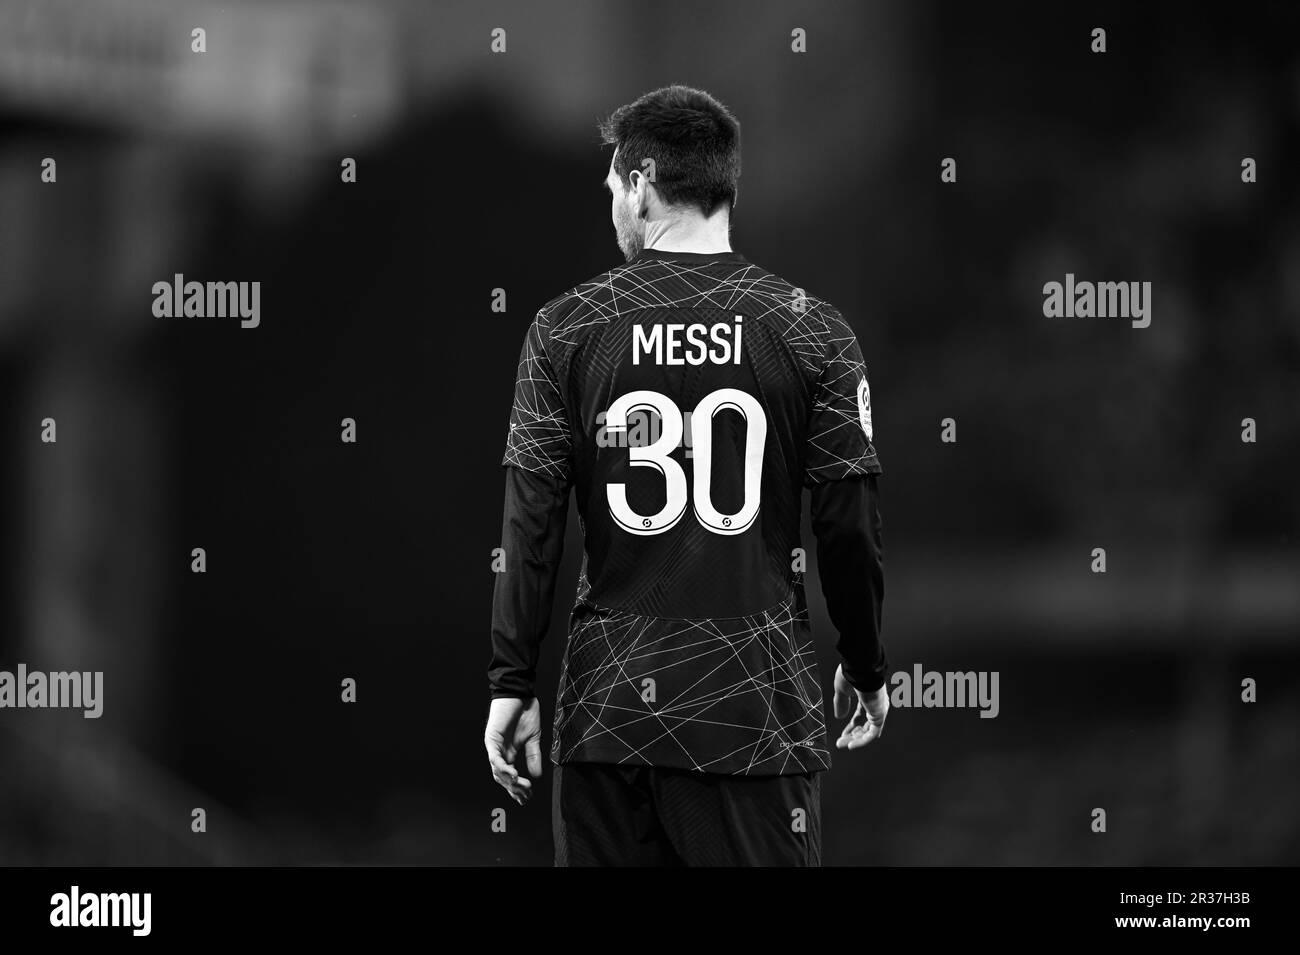 Psg Black and White Stock Photos Images